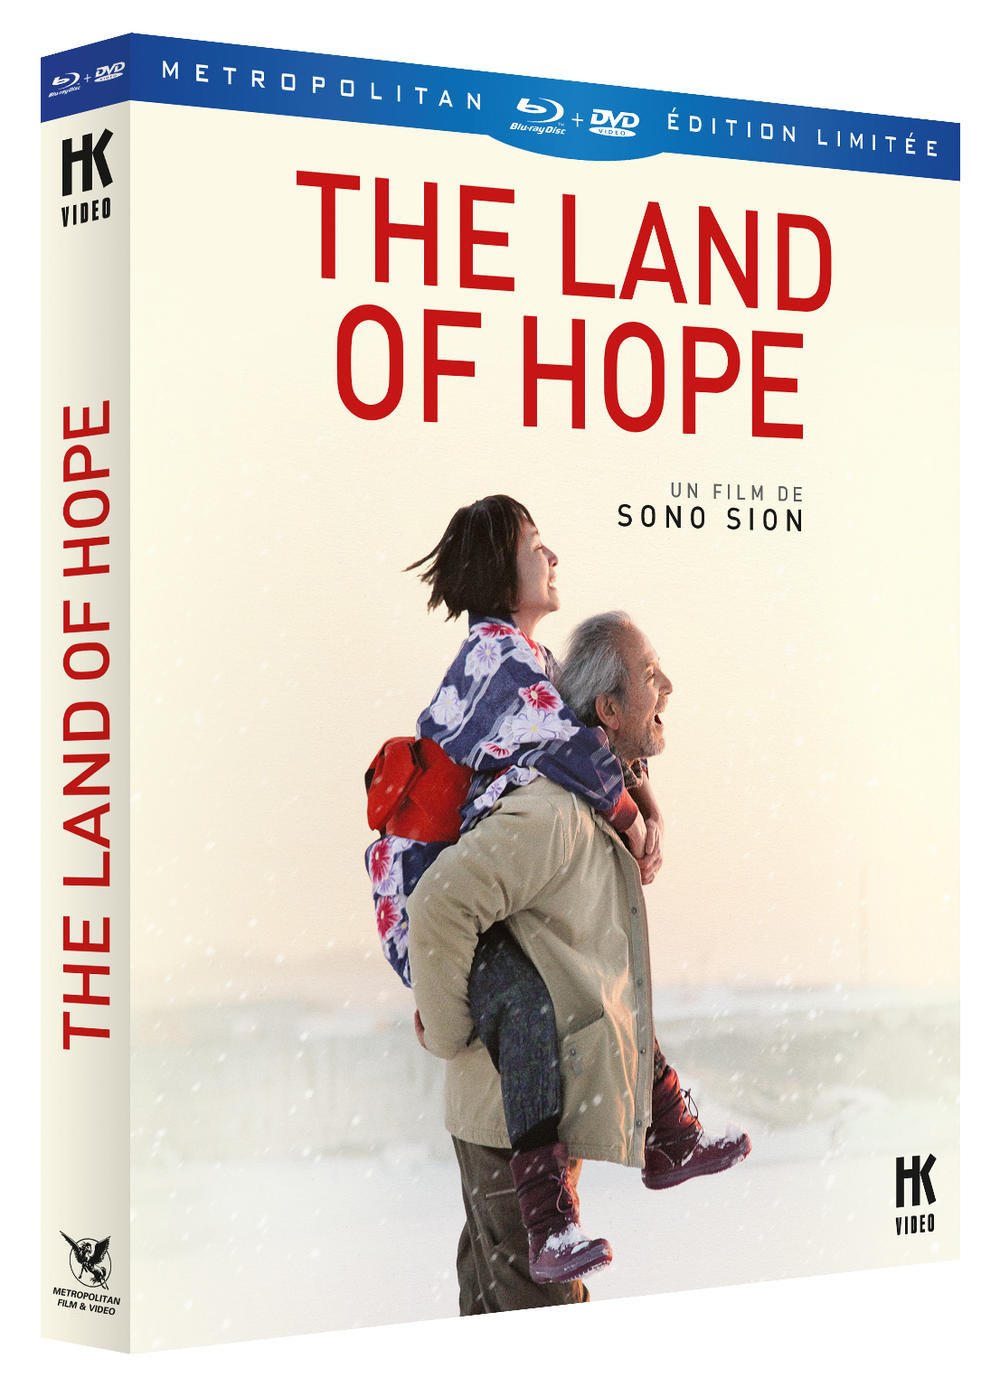 THE LAND OF HOPE